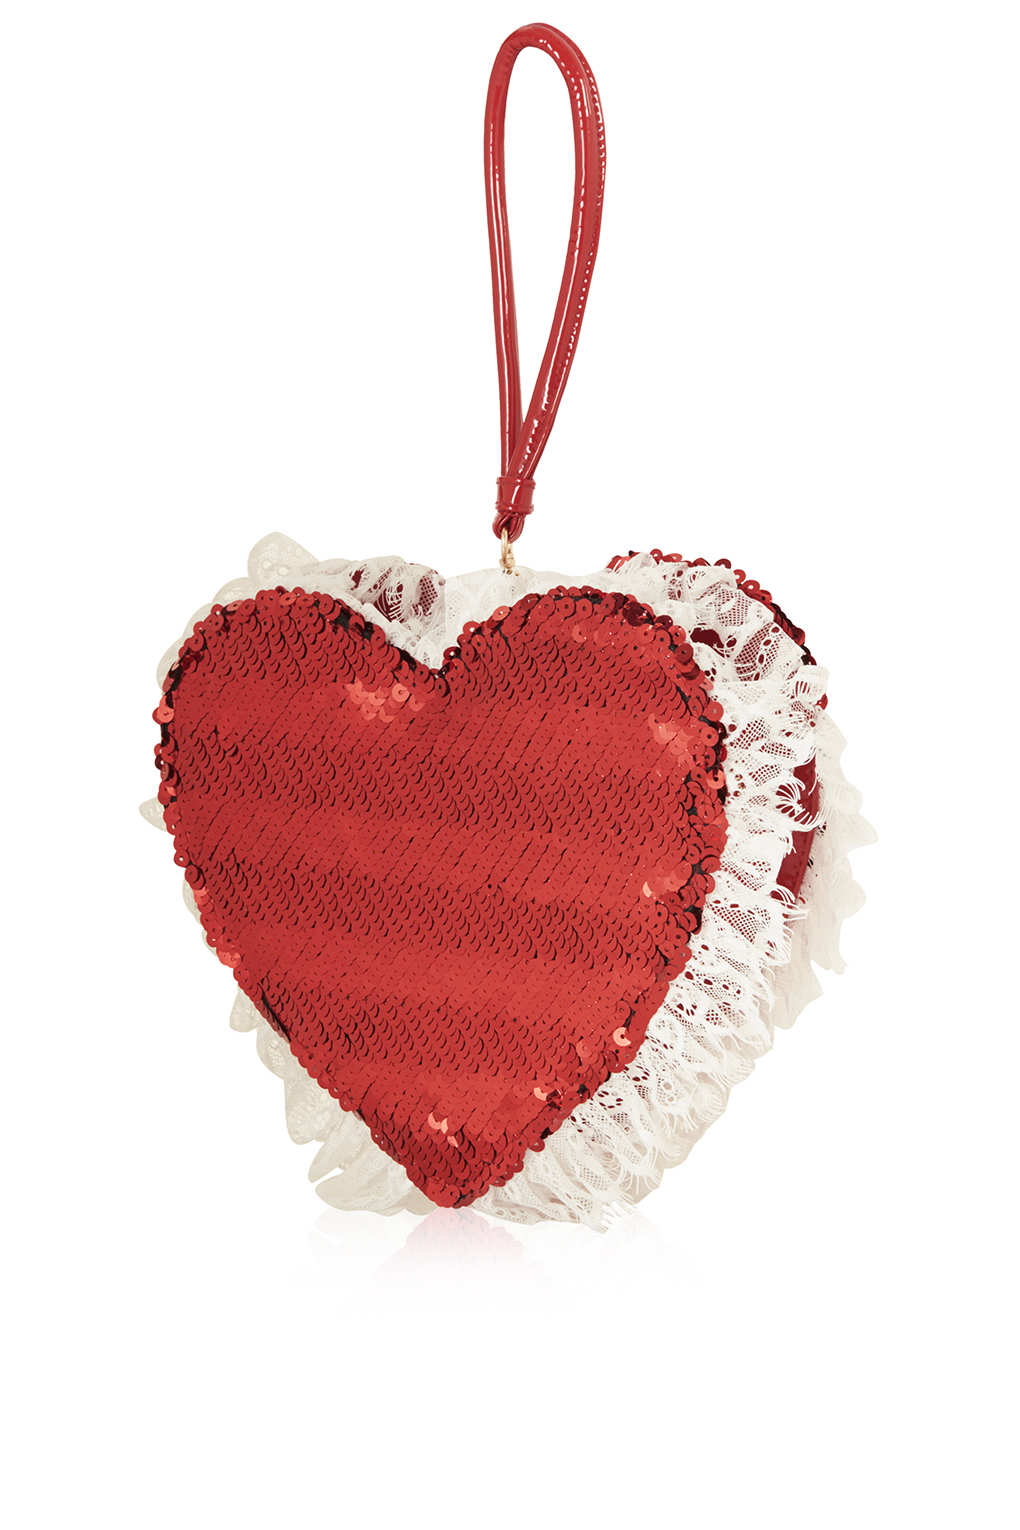 TOPSHOP Red Sequin Heart Bag By Meadham Kirchhoff - Lyst